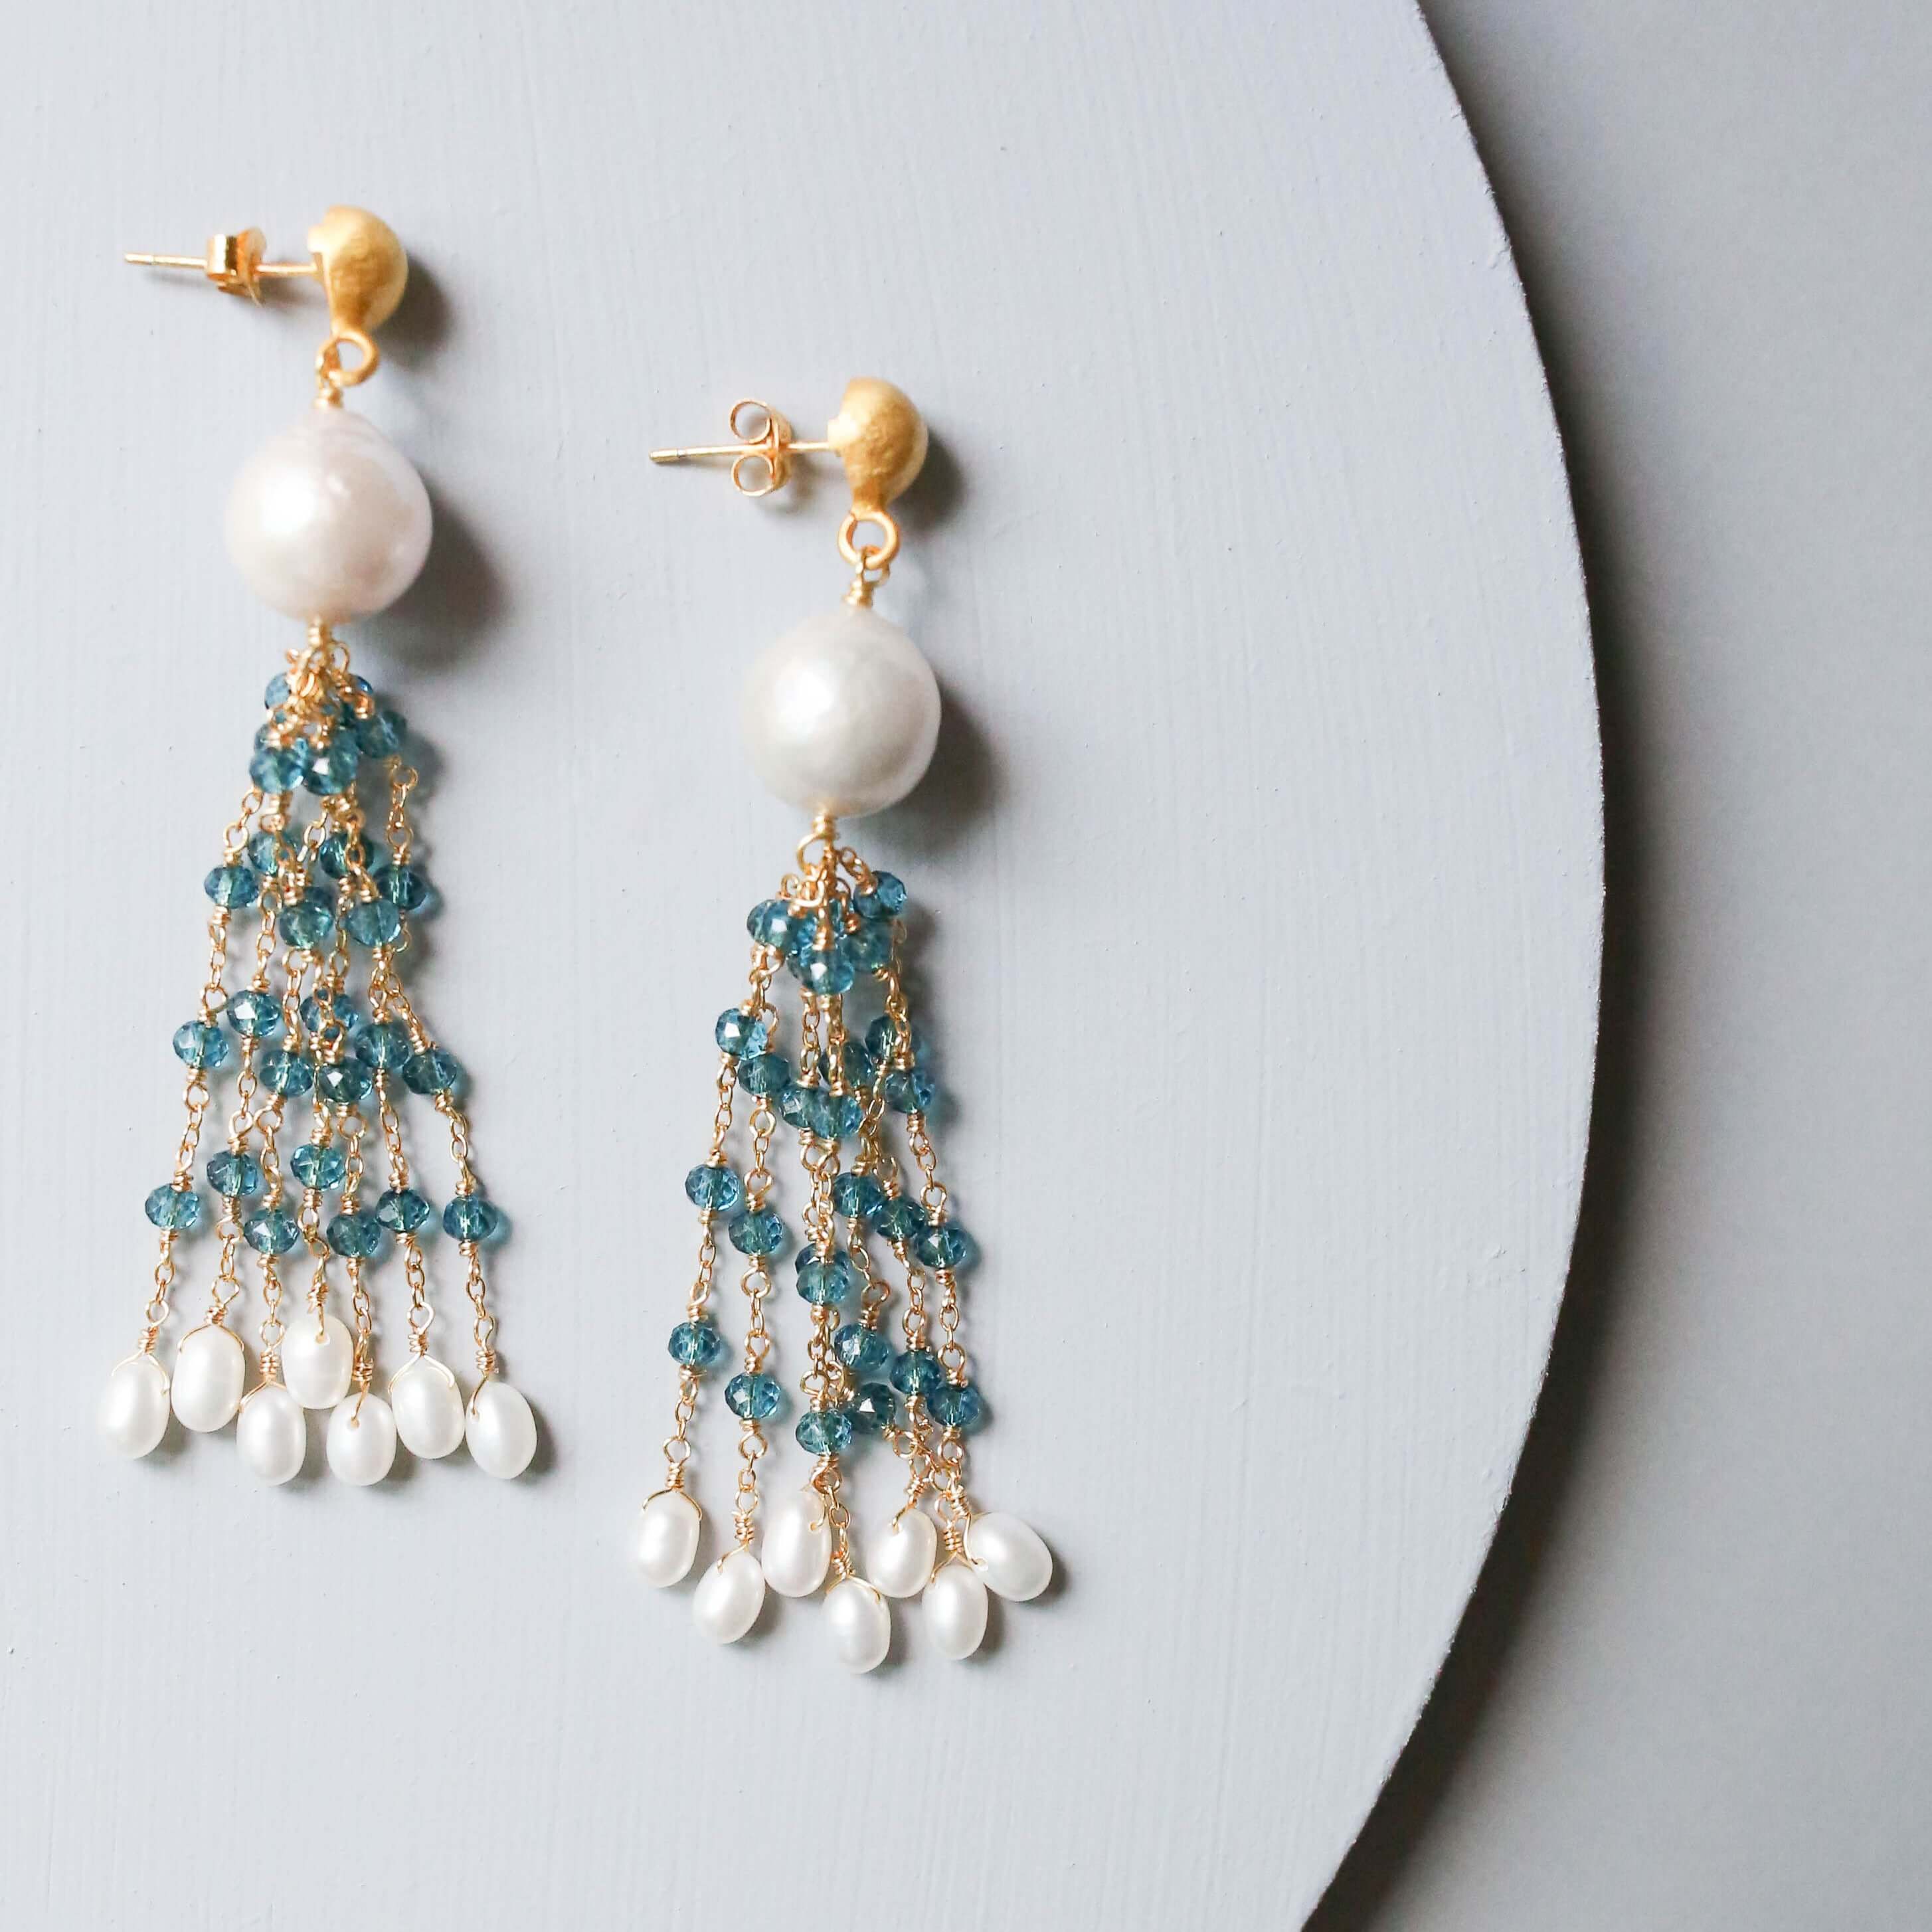 Freshwater baroque pearls, London Blue Quartz and bead pearls Tassel Earrings in Gold plated Italian Silver